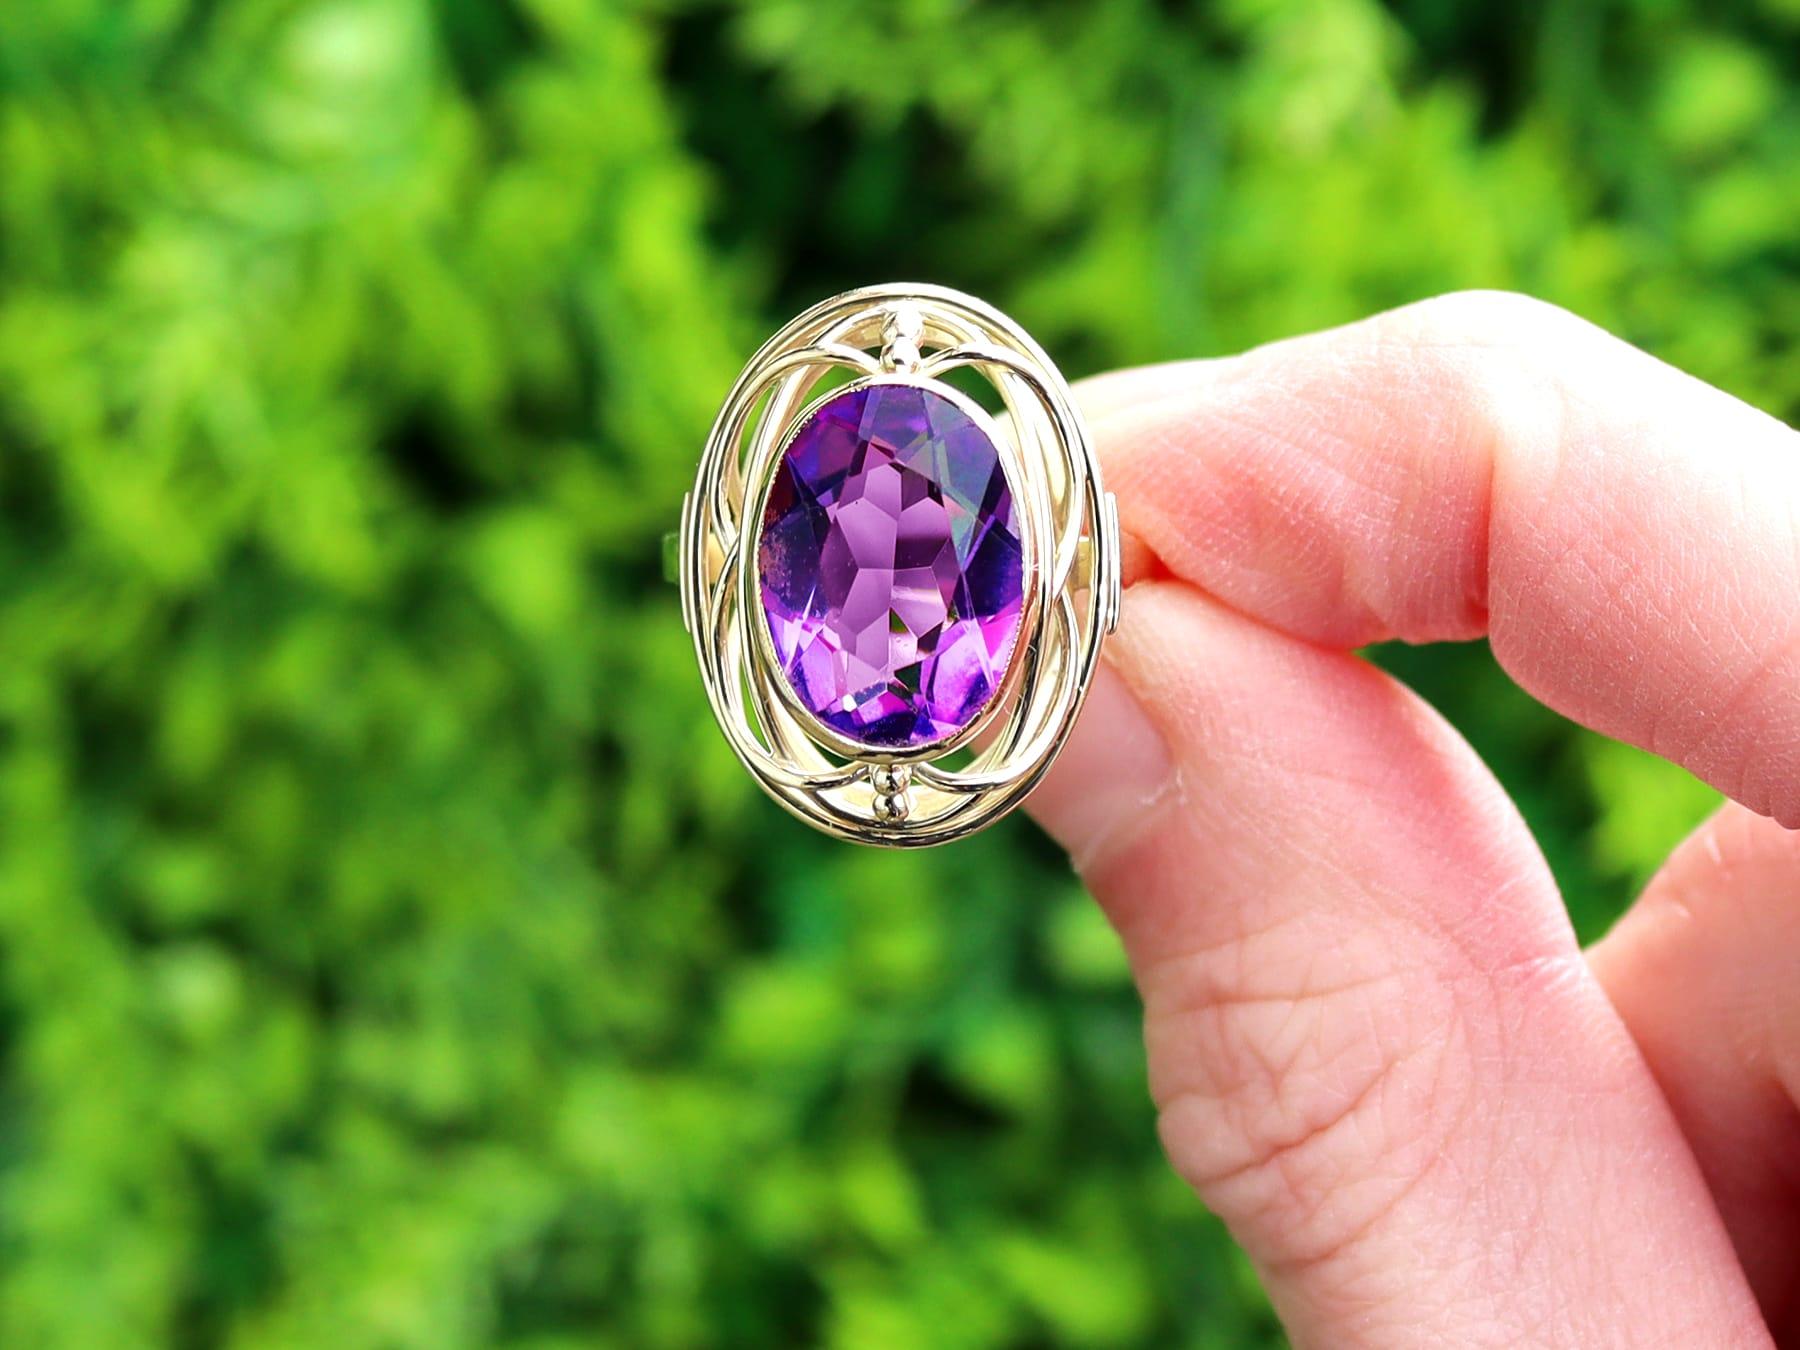 A fine and impressive vintage 6.91 carat amethyst and 14 karat yellow gold dress ring; part of our diverse collection of vintage amethyst jewellery.

This fine and impressive oval amethyst ring has been crafted in 14k yellow gold.

The pierced